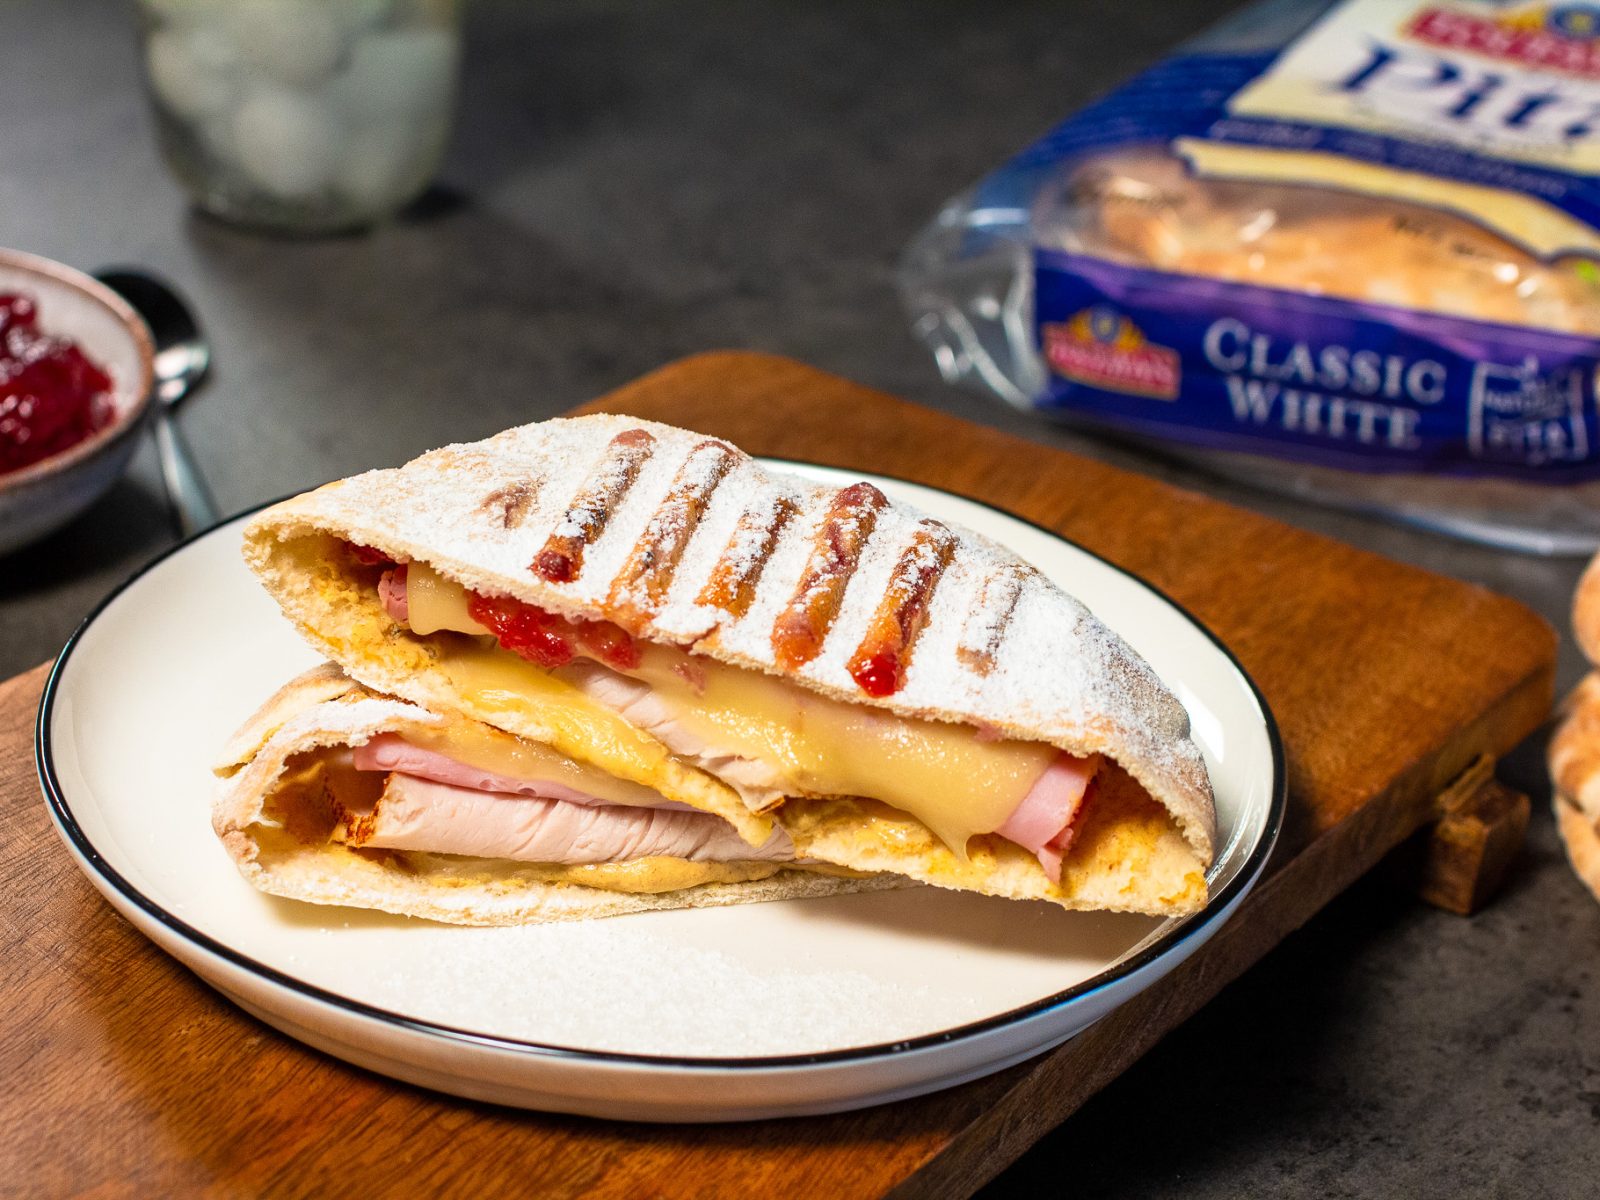 Toufayan Pita Monte Cristo-Style Panini Is The Perfect Holiday Leftover Meal – Grab Toufayan Pita Bread While It’s BOGO At Publix